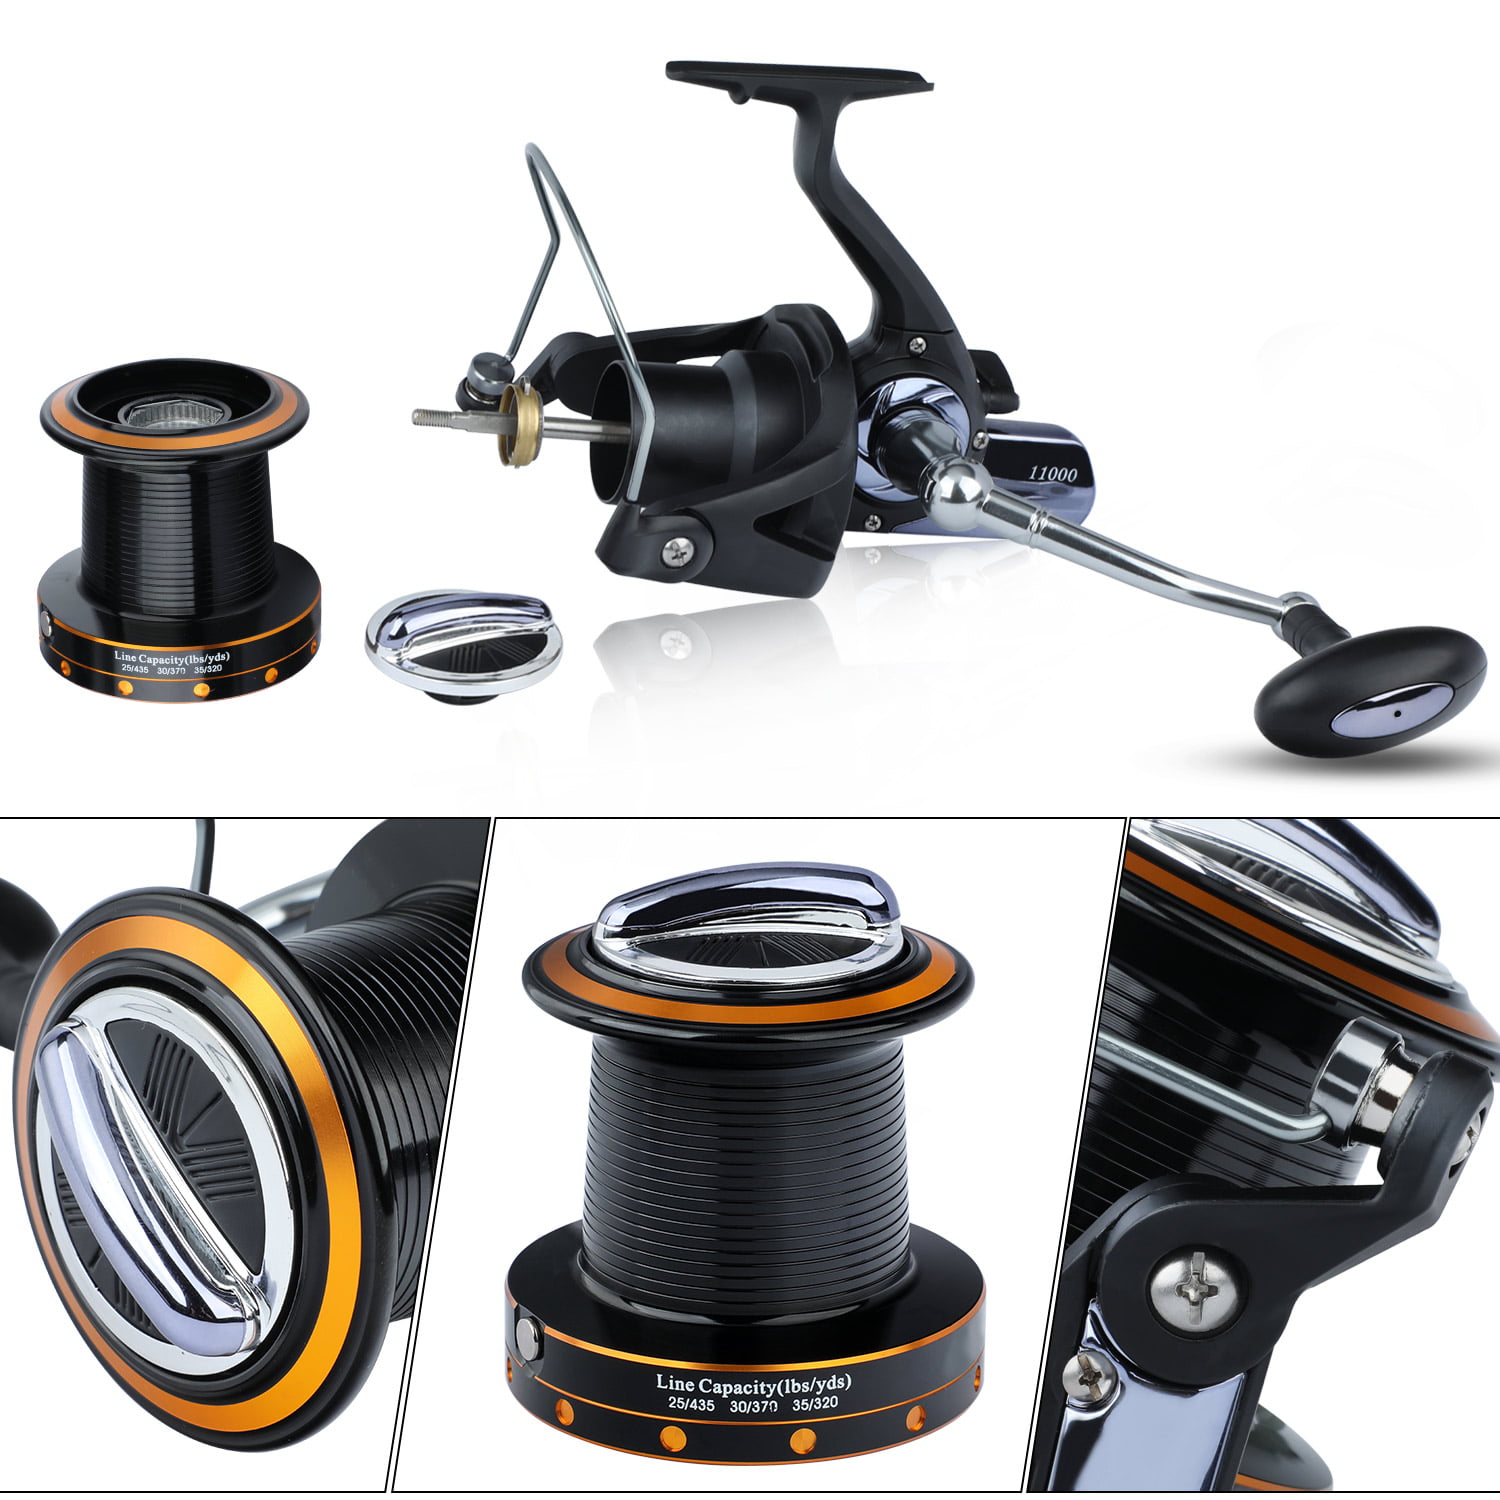 Saltwater Coils Tatula Spinning Reel With High And Low Gear Ratio ABS Spool  Available In 1000/2000/2500/3000/4000/5000/6000 Sizes From Harden_vol7,  $83.71